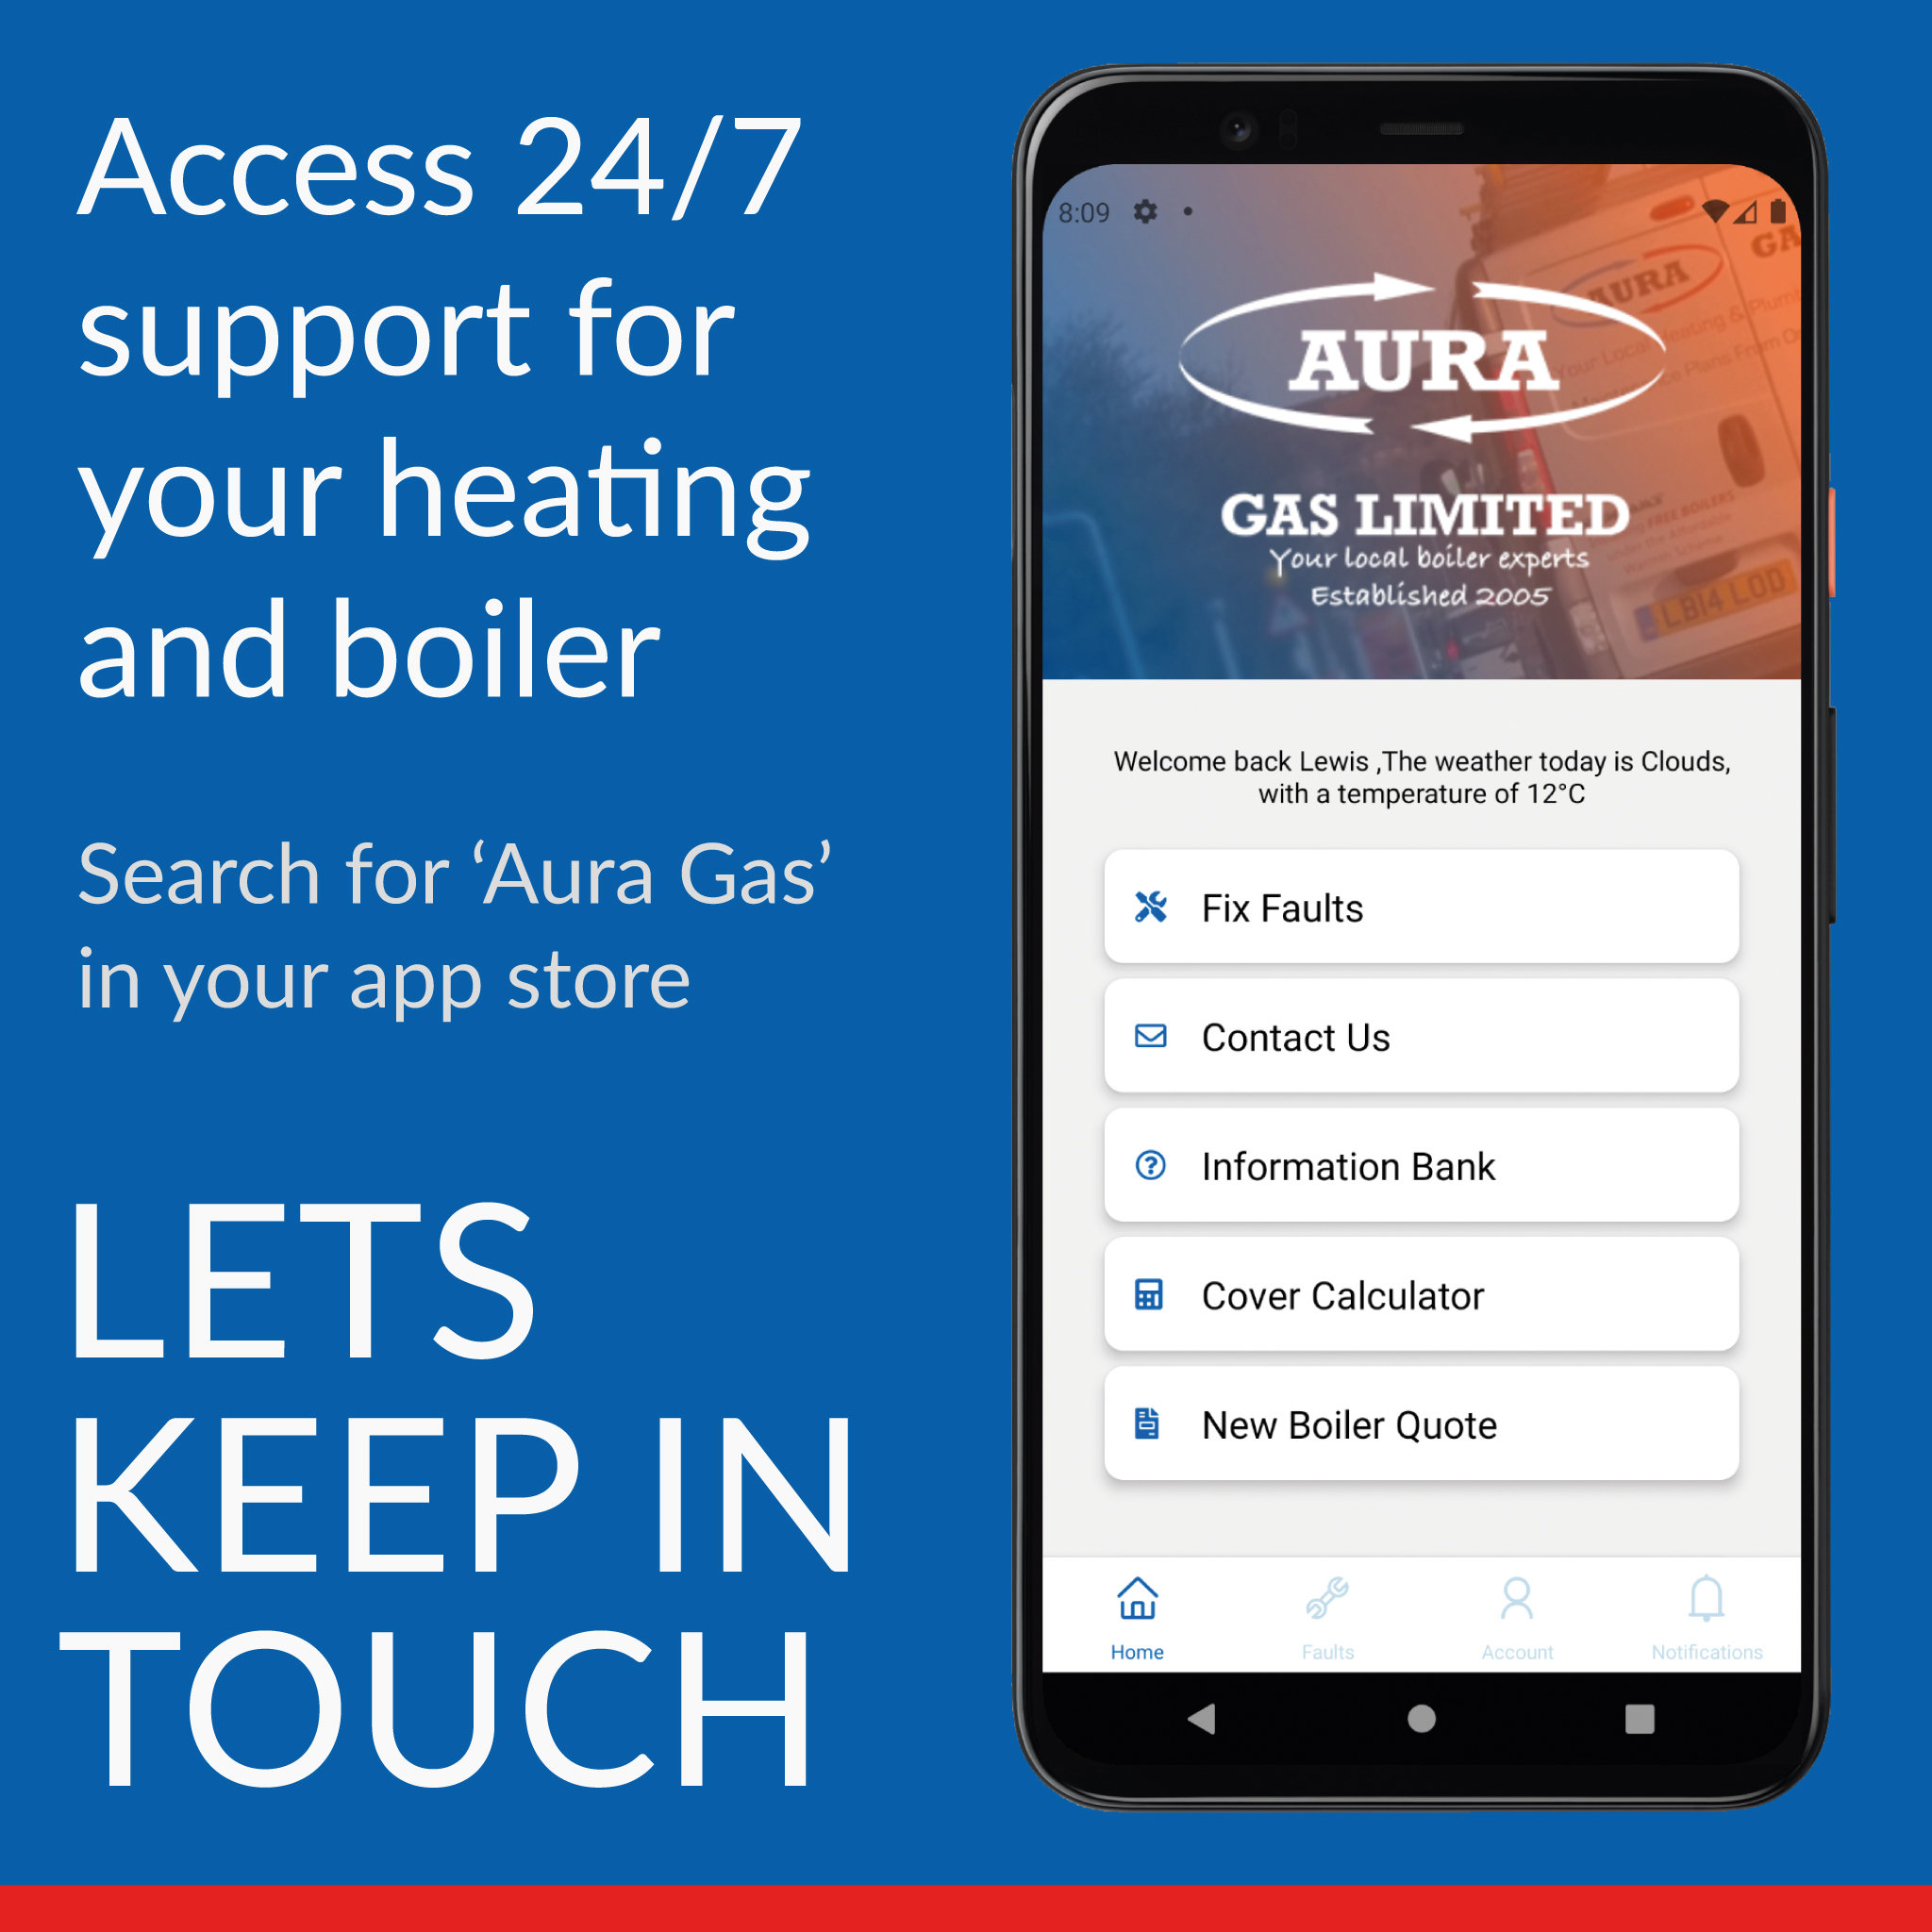 We’ve Launched the Aura Heating App!